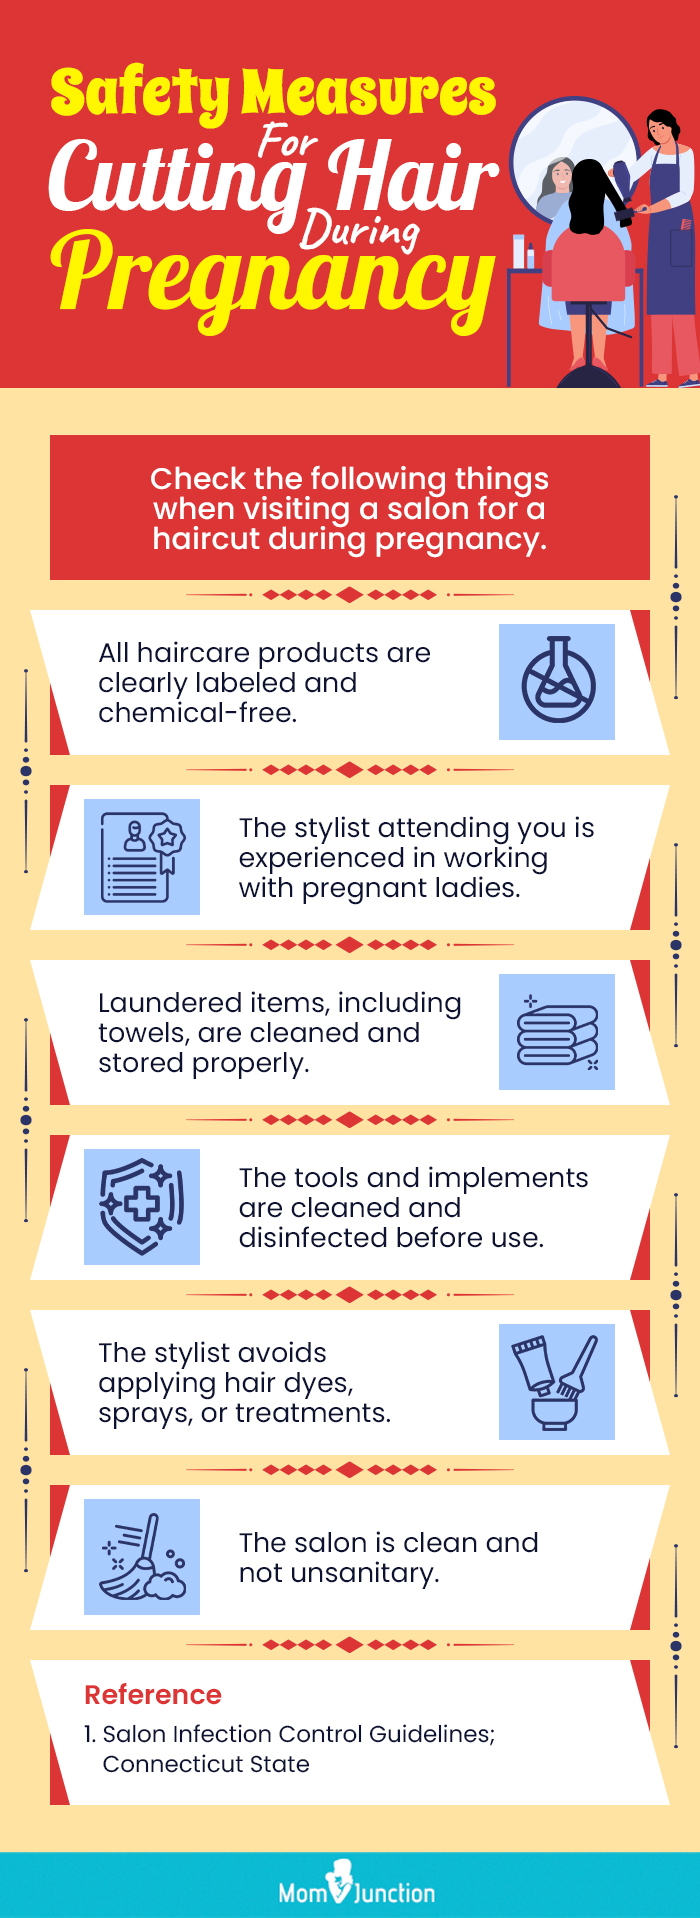 safety measures for cutting hair during pregnancy (infographic)